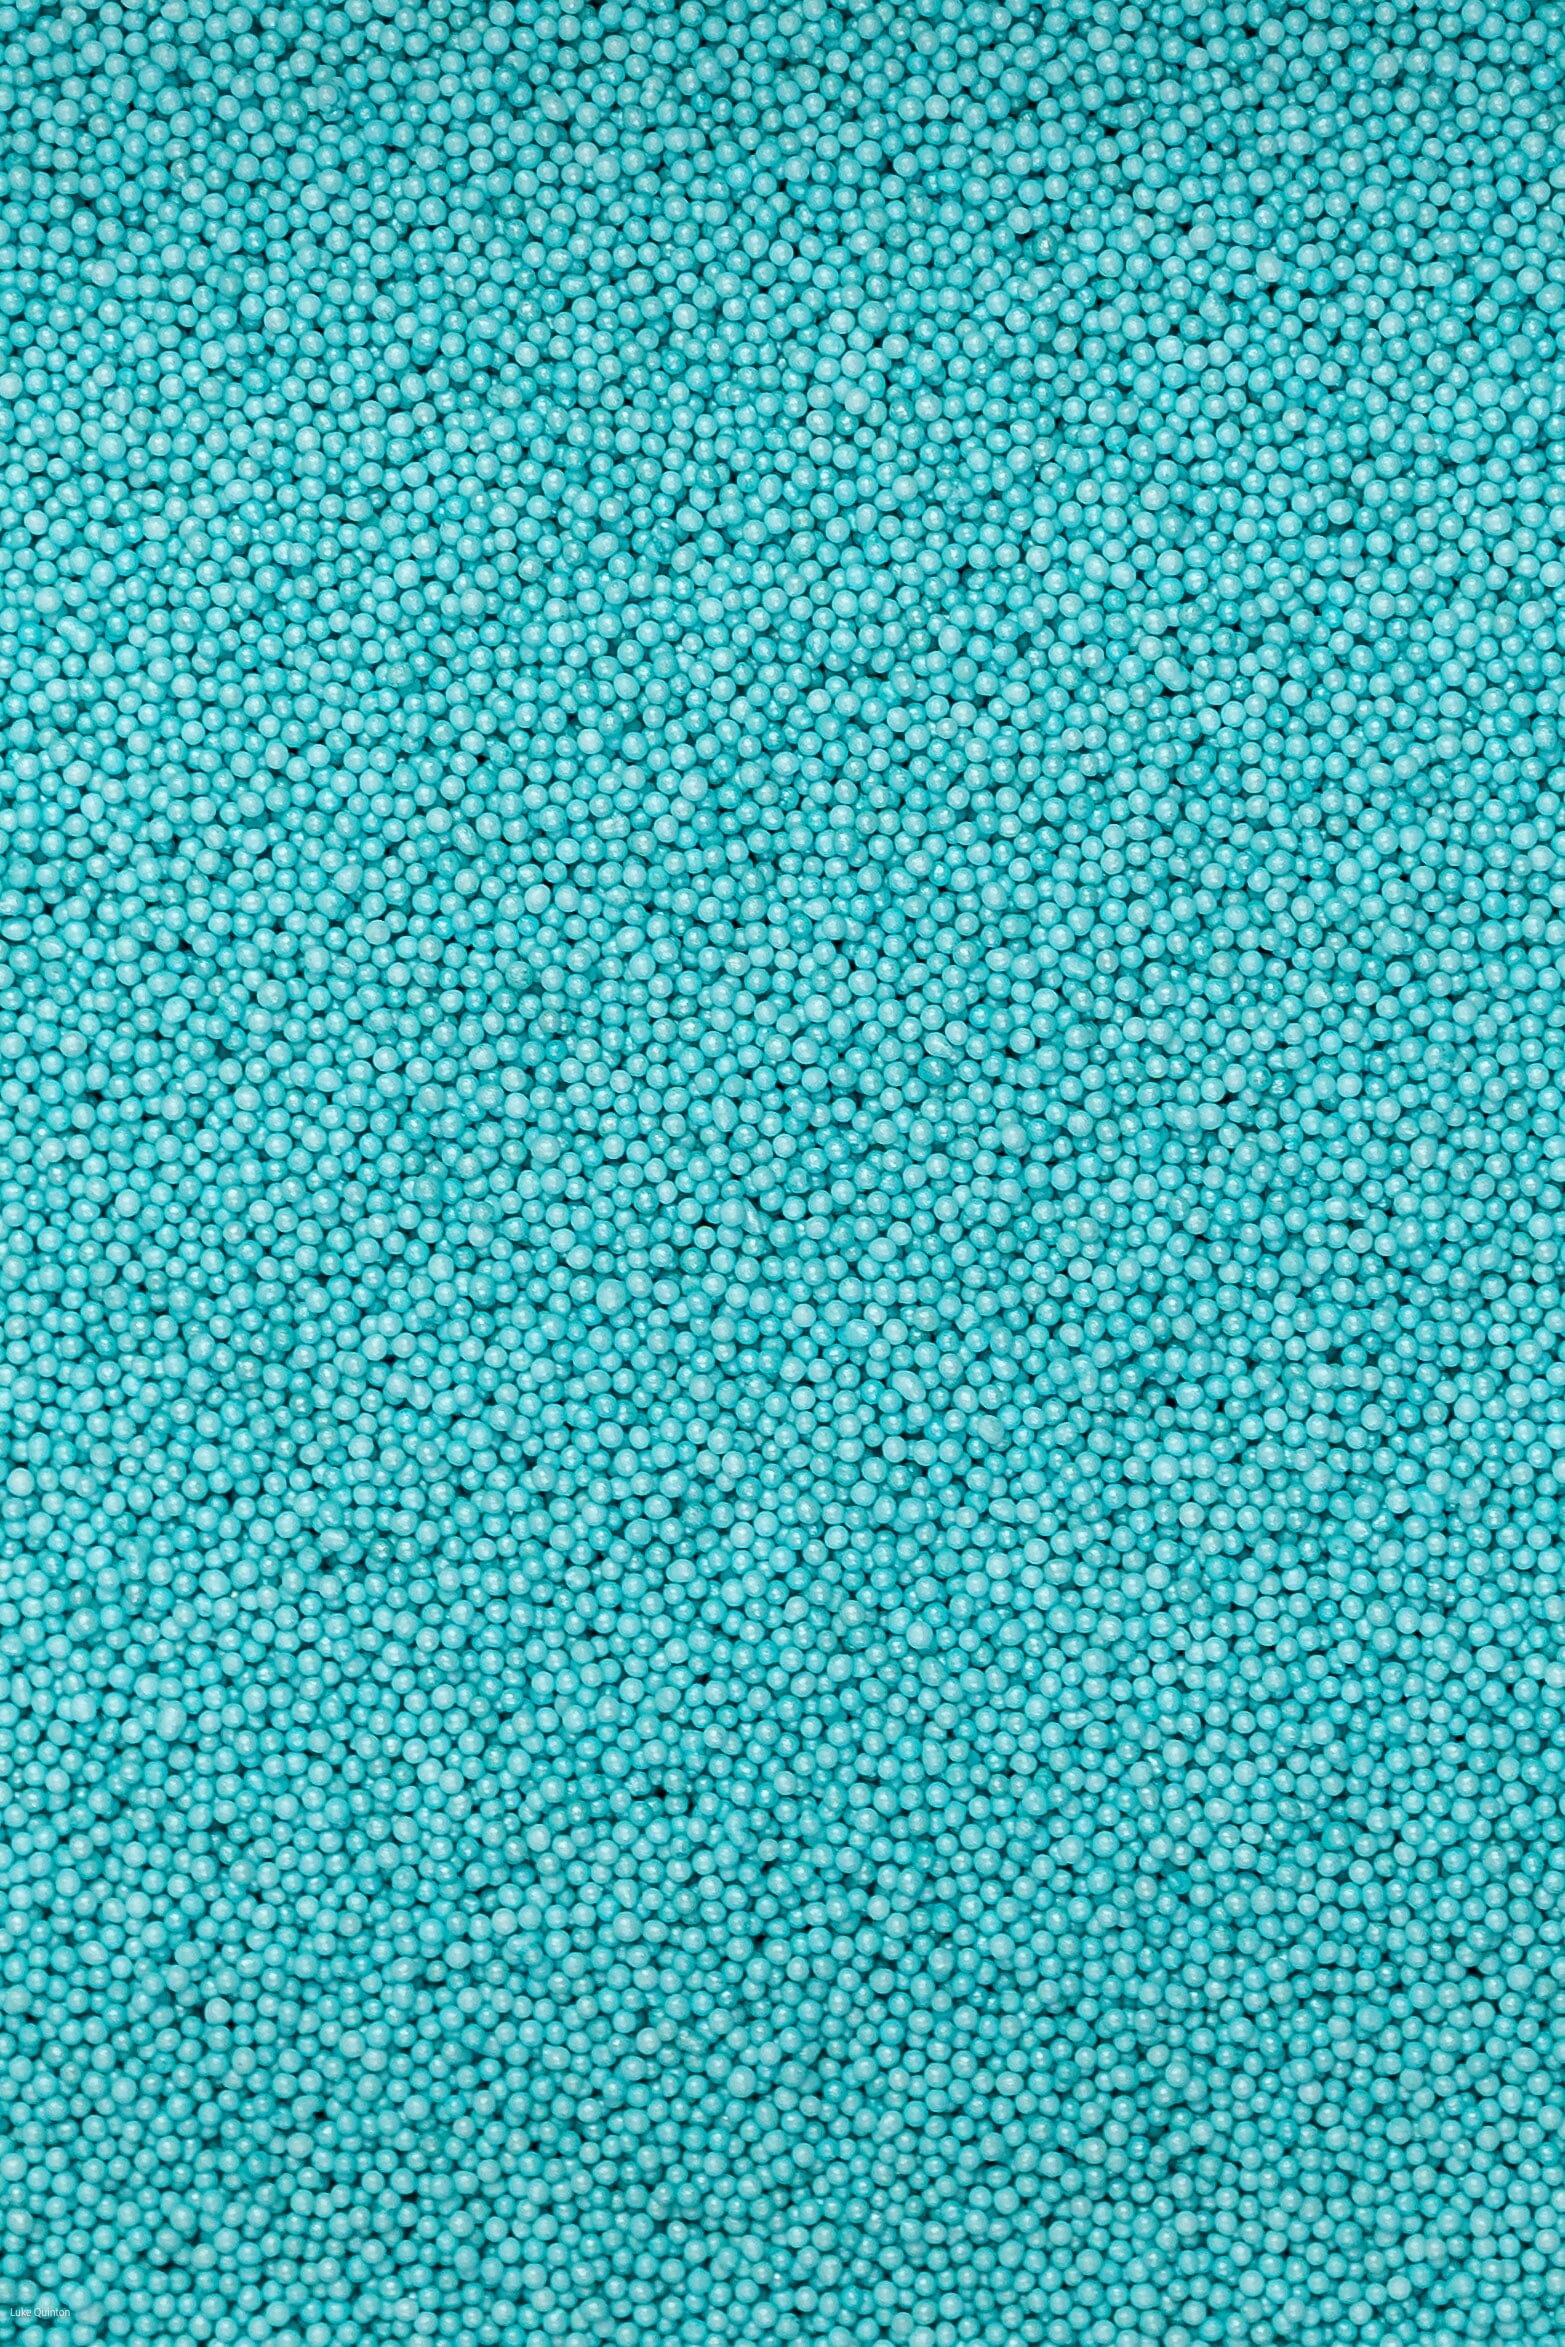 Glimmer 100's & 1000's - Turquoise (No E171) Sprinkles SPRINKLY